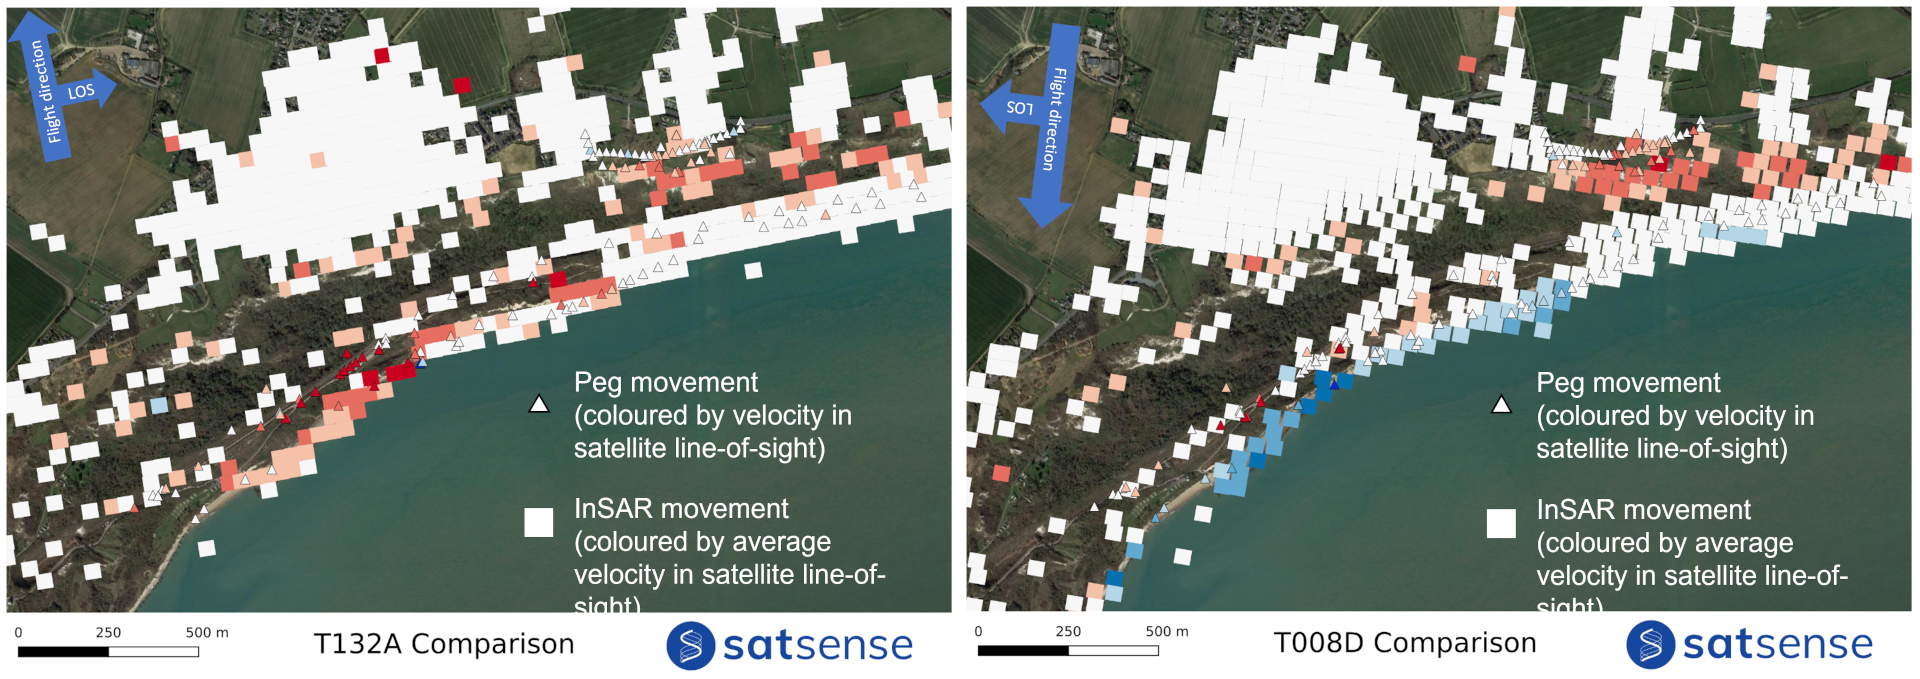 Comparative images showing how INSAR data covers a much larger area than on ground peg monitoring methods
